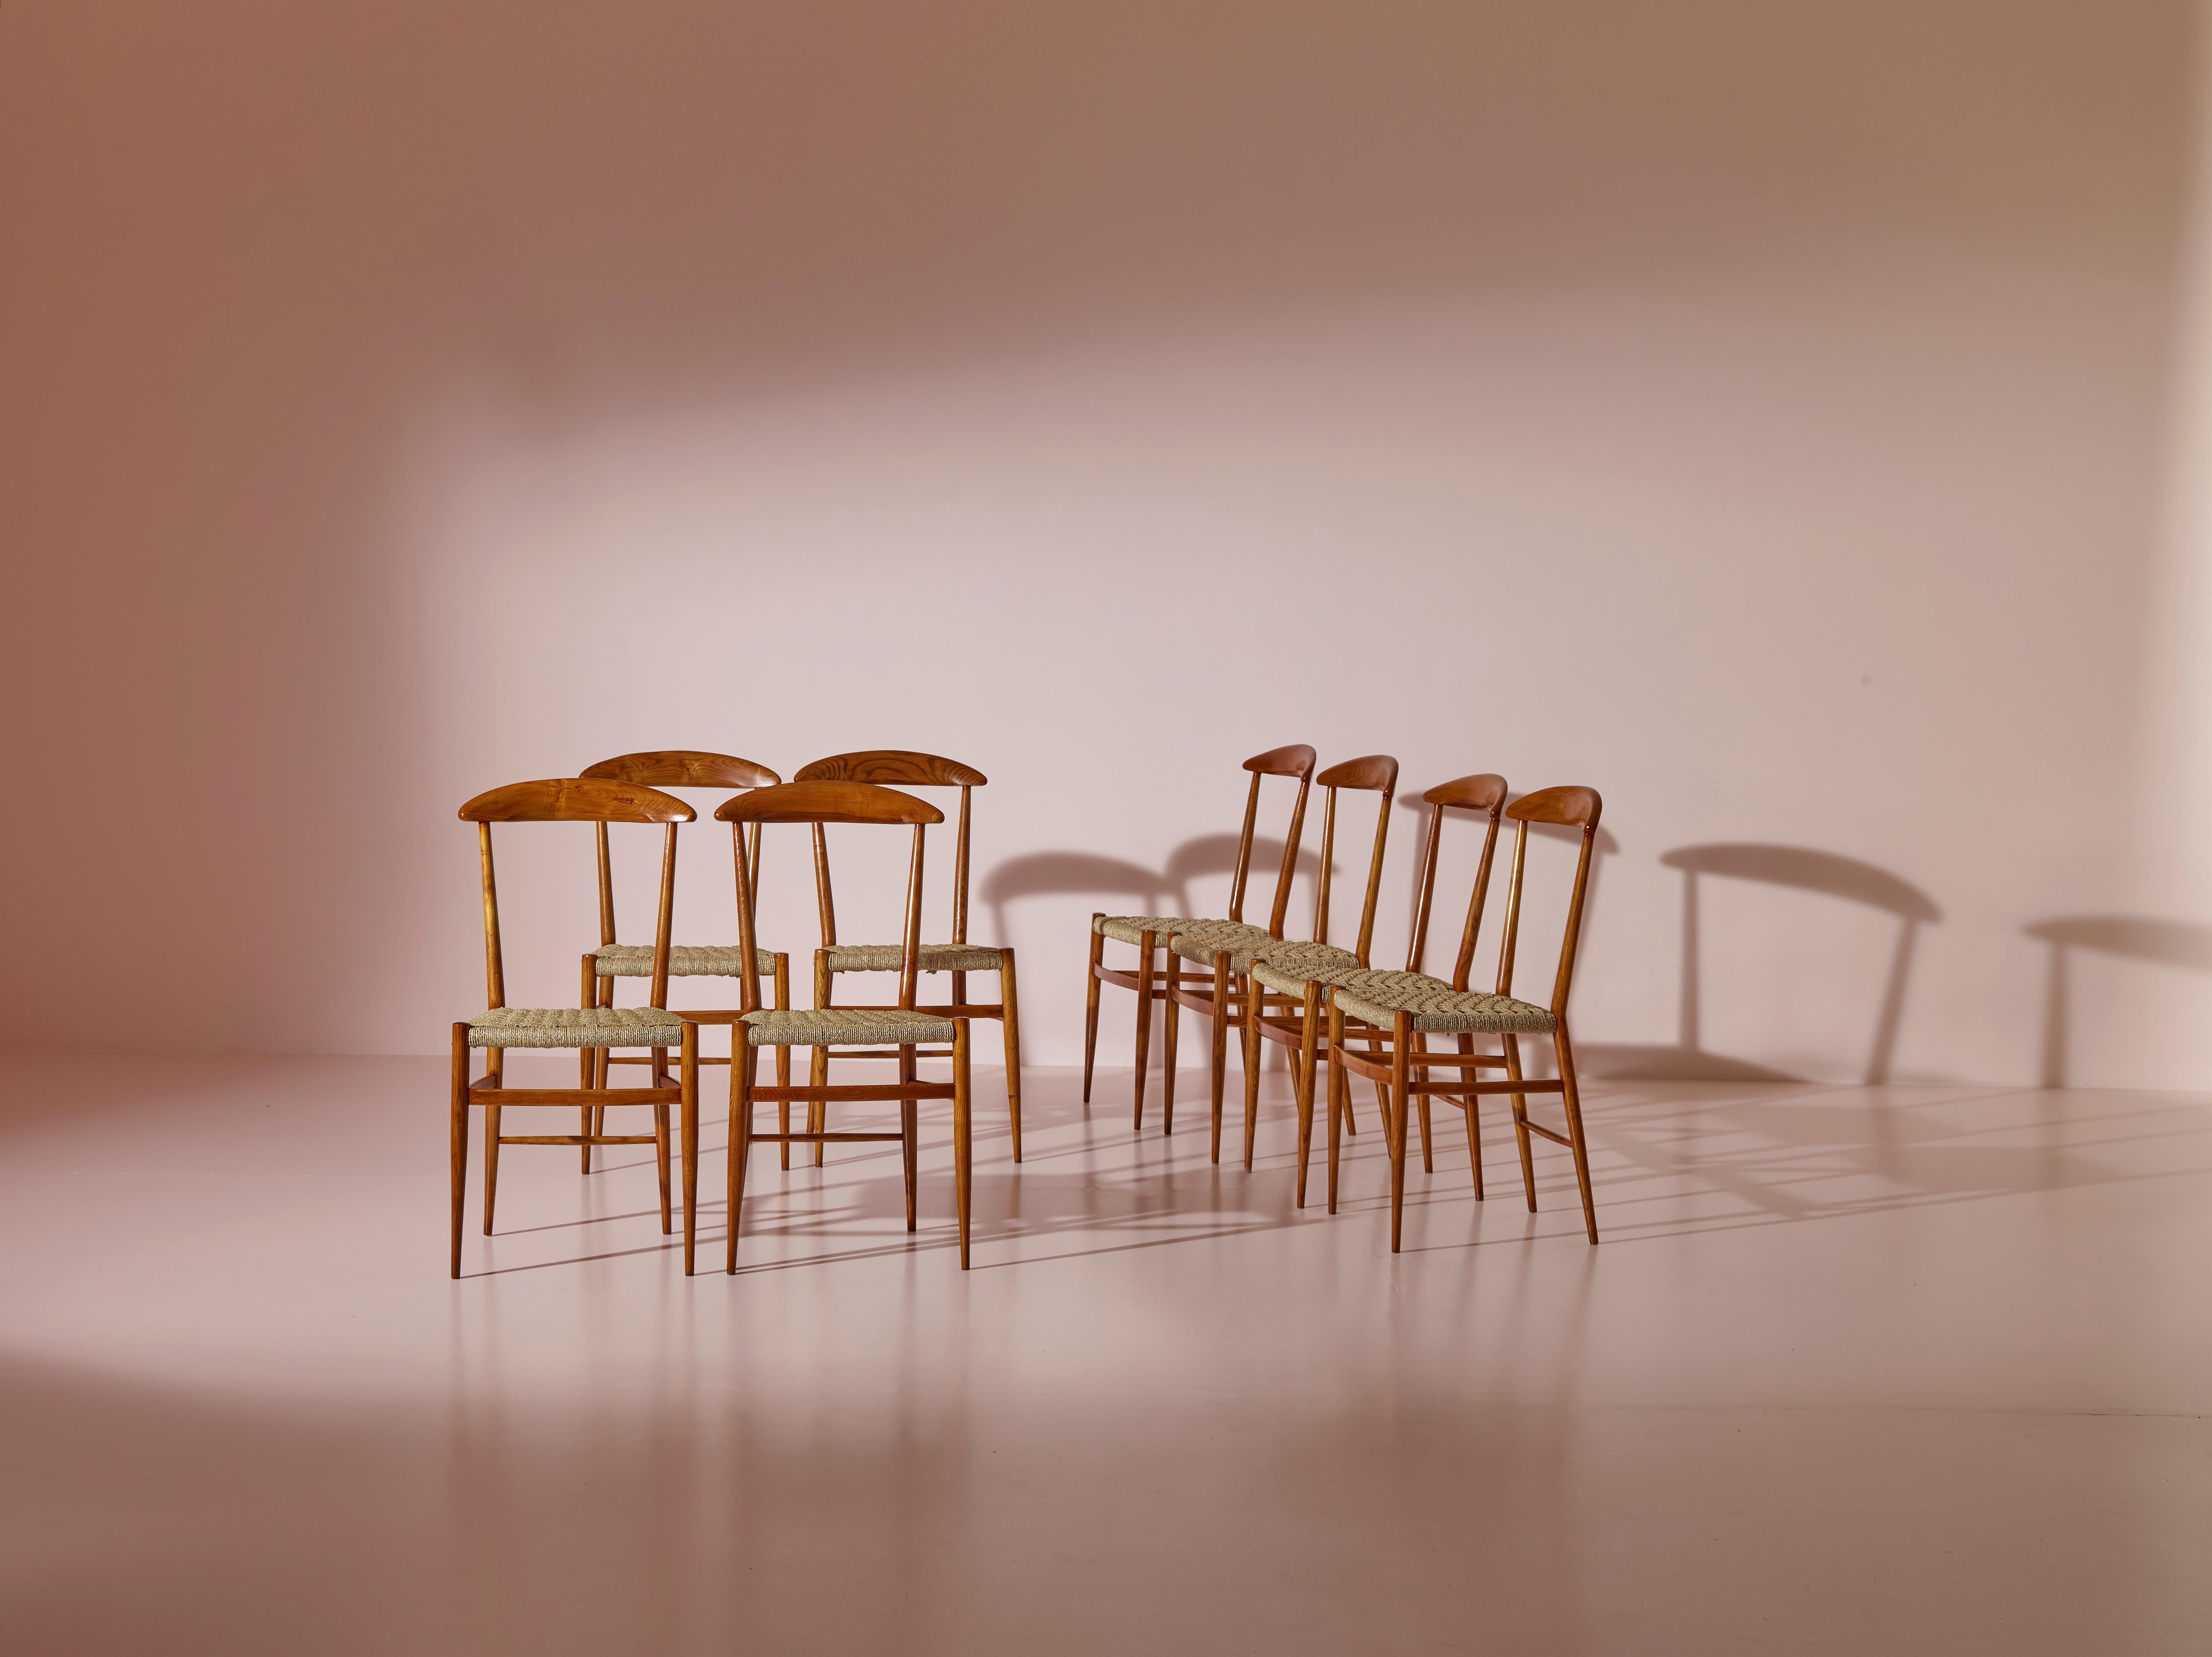 Guido Chiappe set of 8 dining chairs made of beech and rope, Chiavari, 1950s For Sale 1